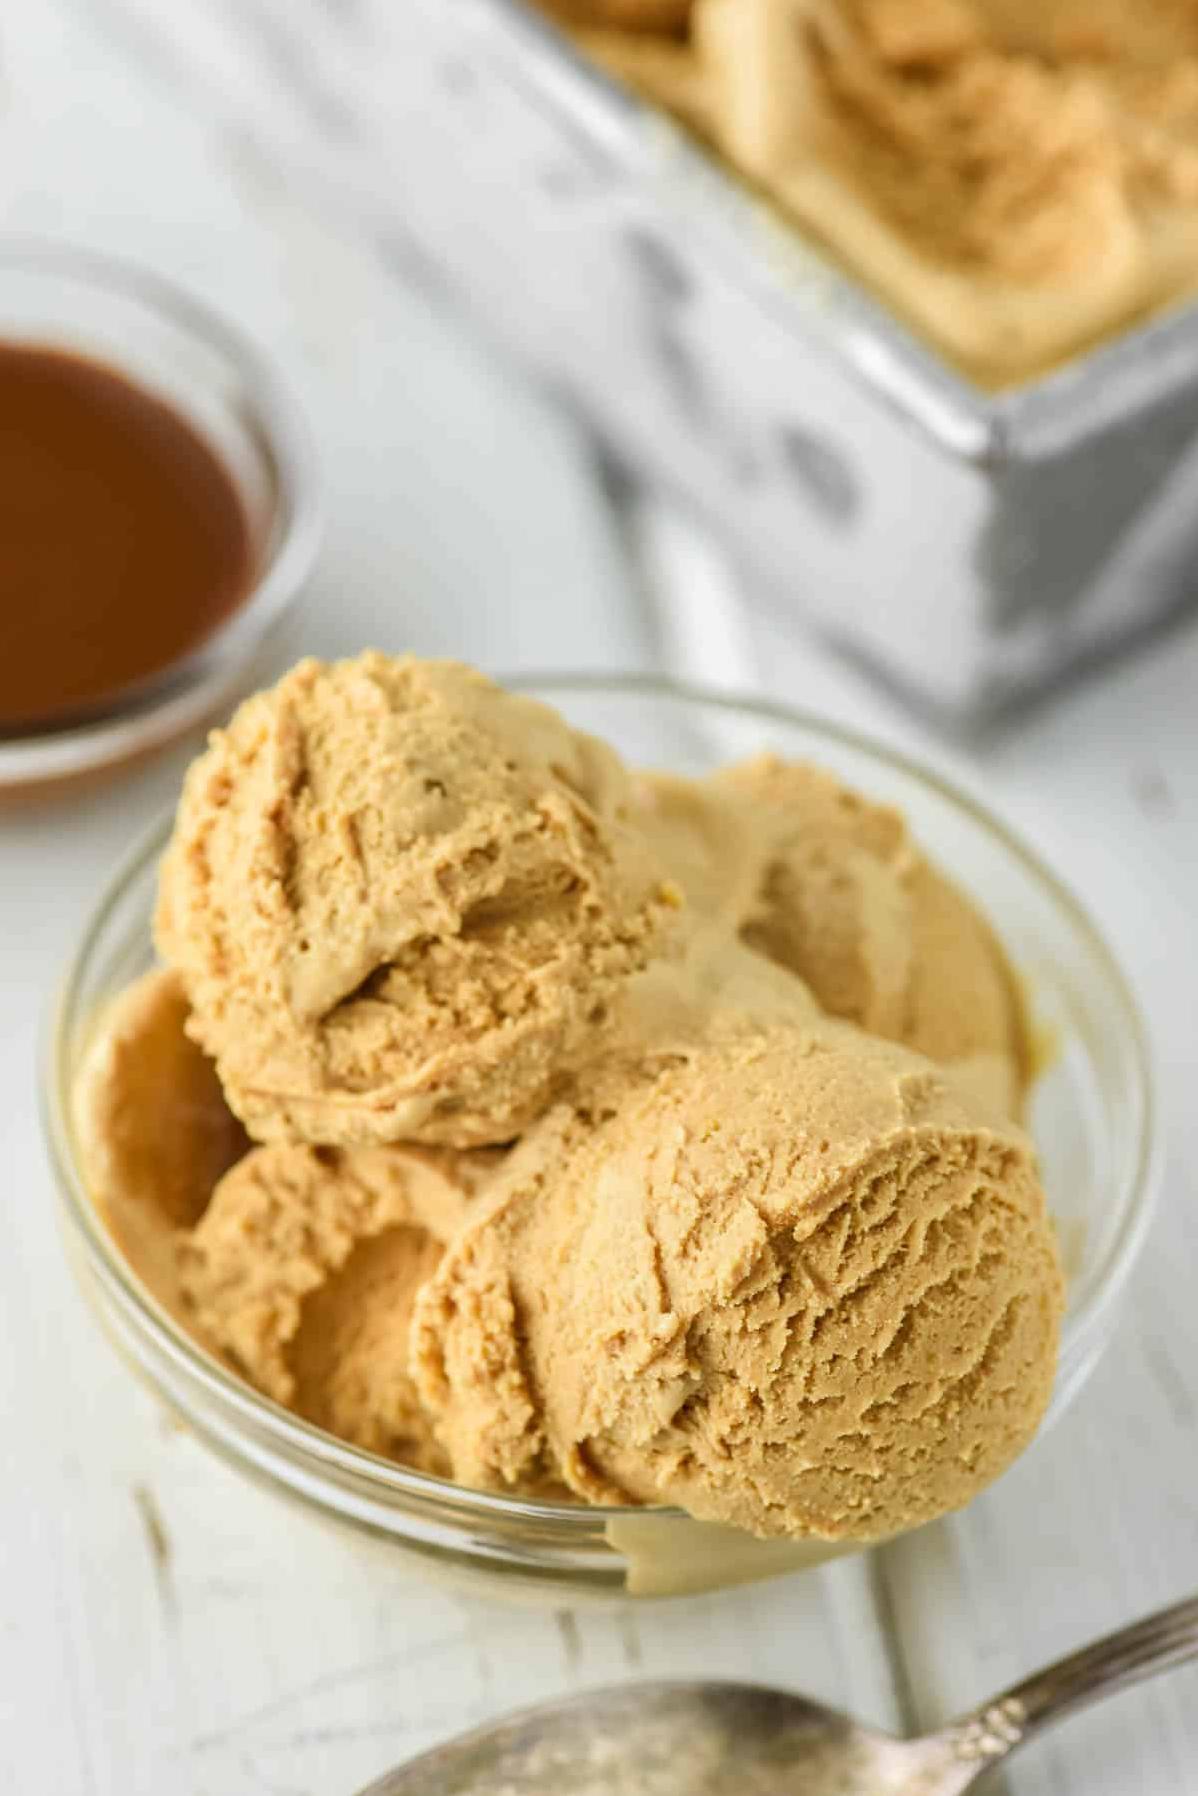  Who says you have to wait for a special occasion to enjoy a scoop of this heavenly dessert?